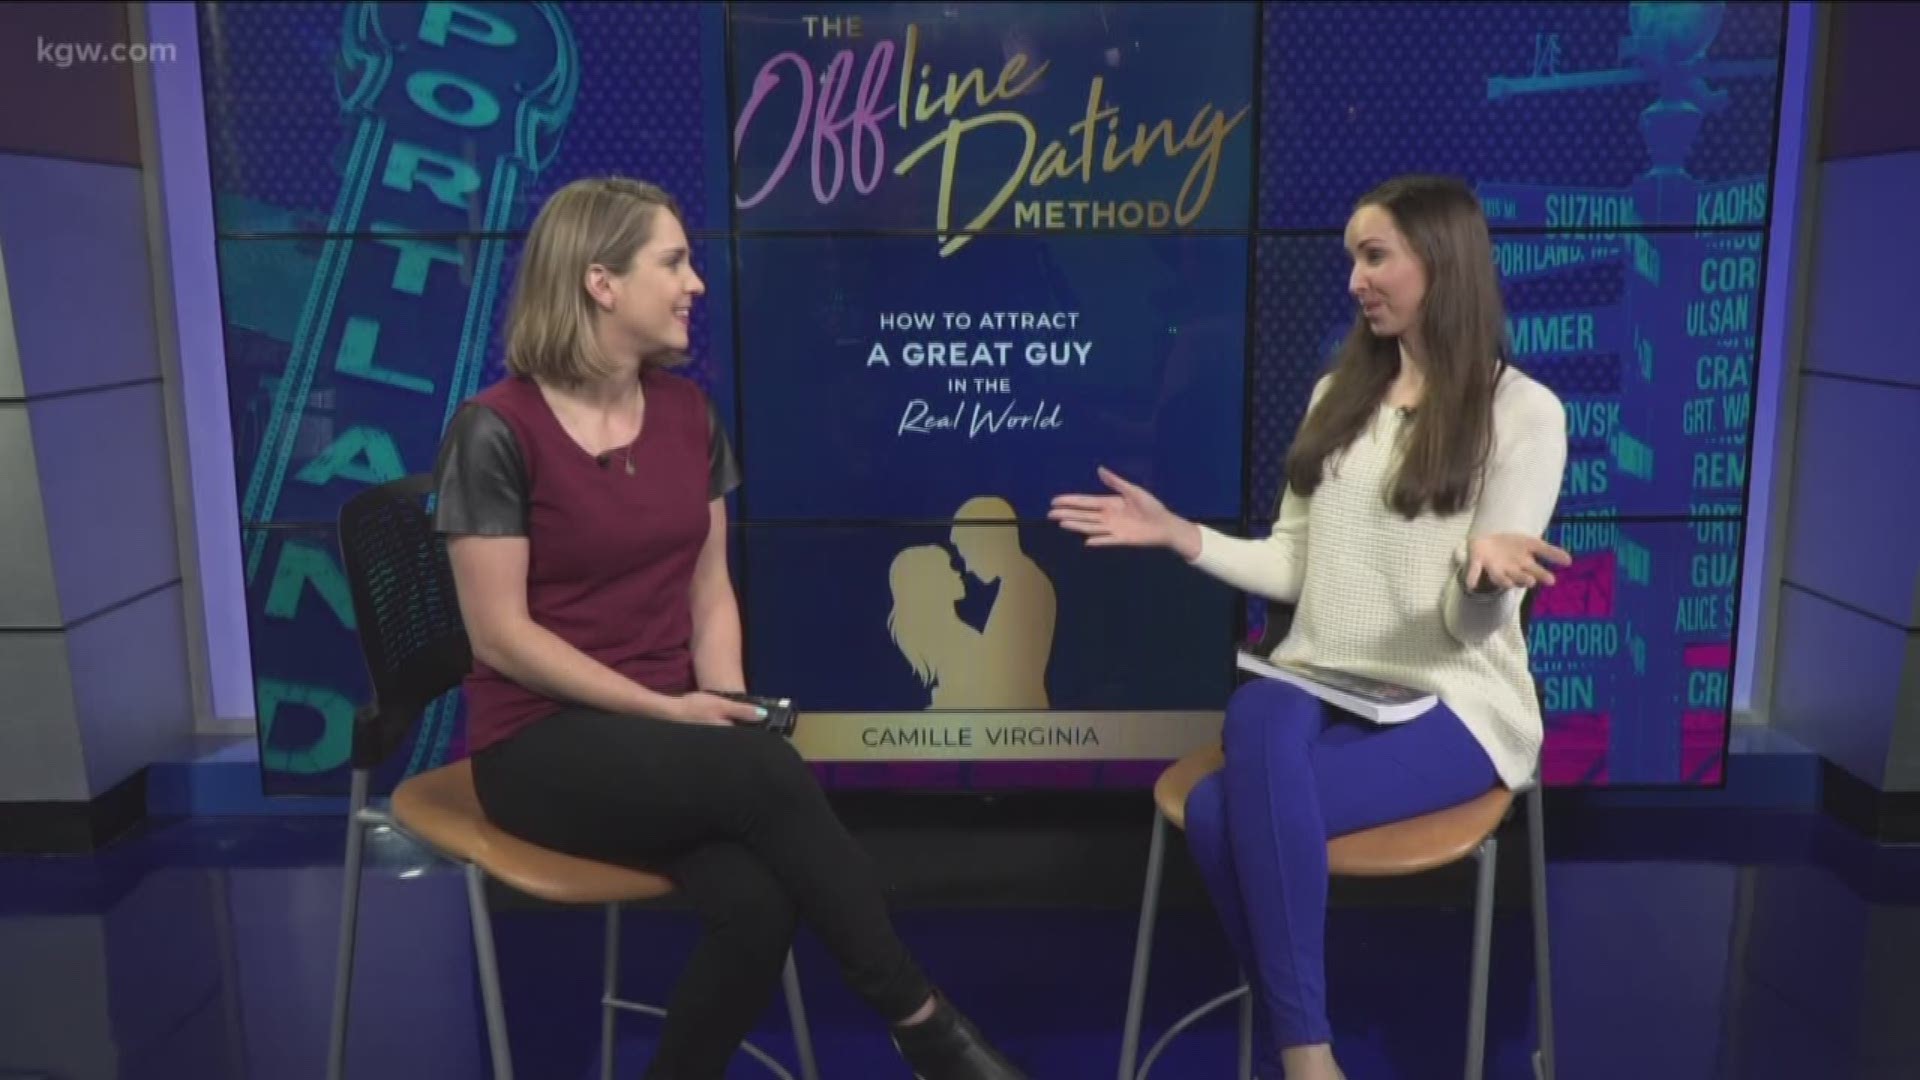 "The Offline Dating Method" released by local author, Camille Virginia may have you questioning your use of dating apps. 
offlinedatingmethod.com
#TonightwithCassidy